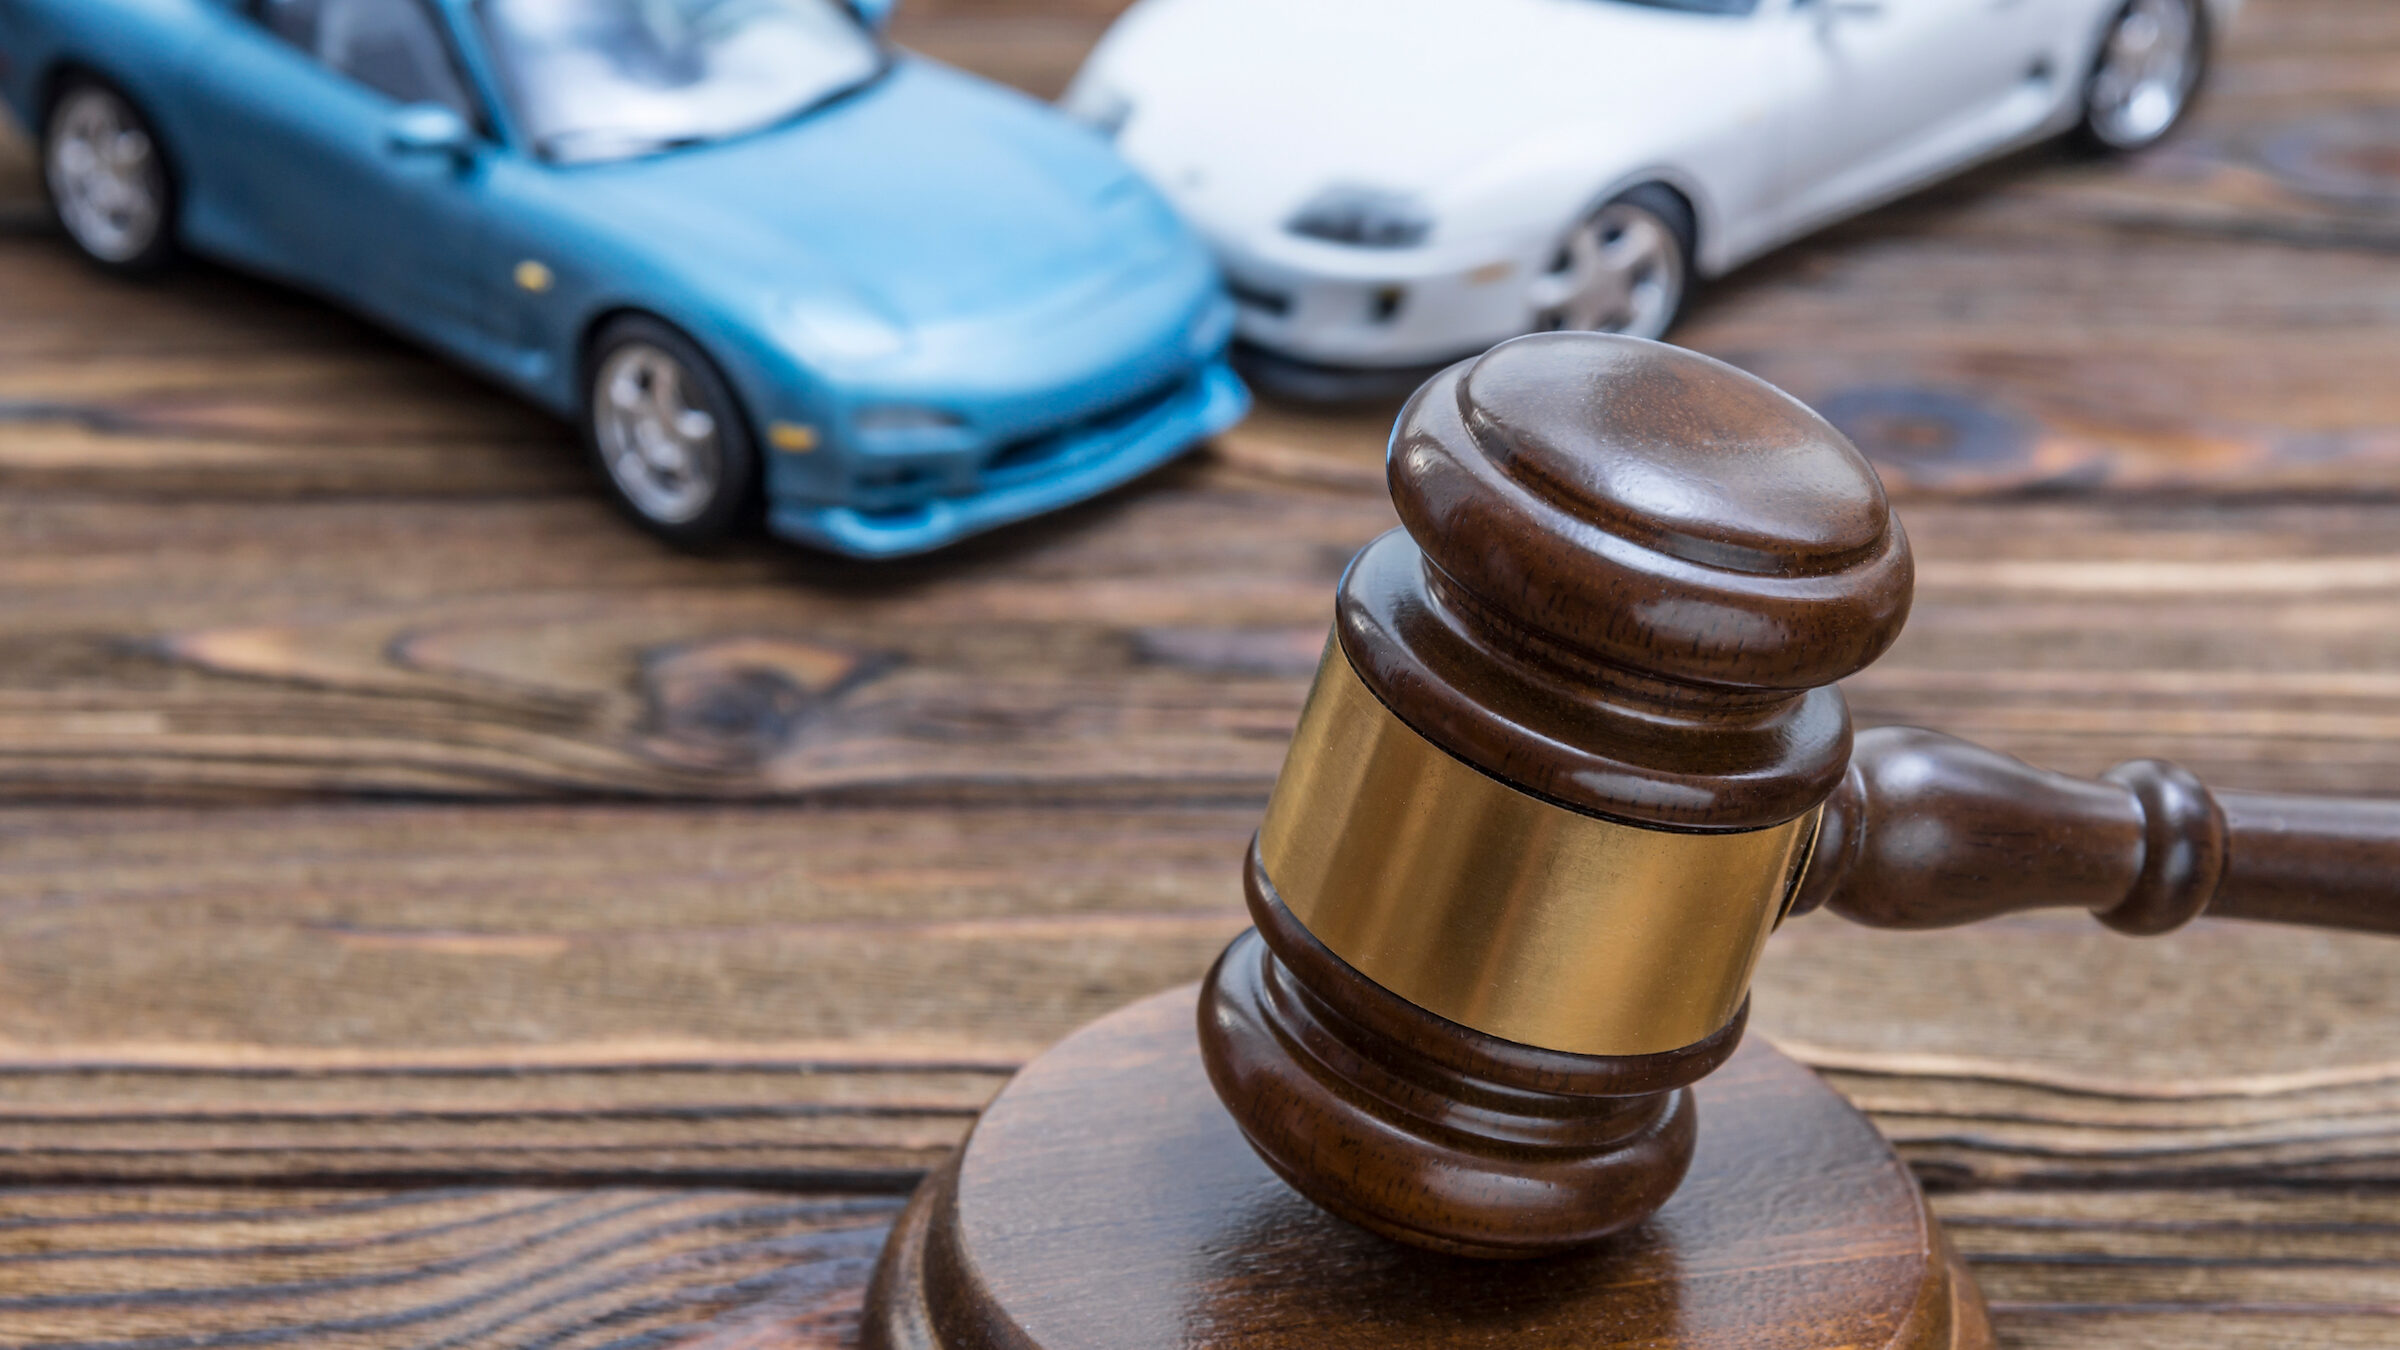 Should You Get A Lawyer After A Serious Car Accident In NYC